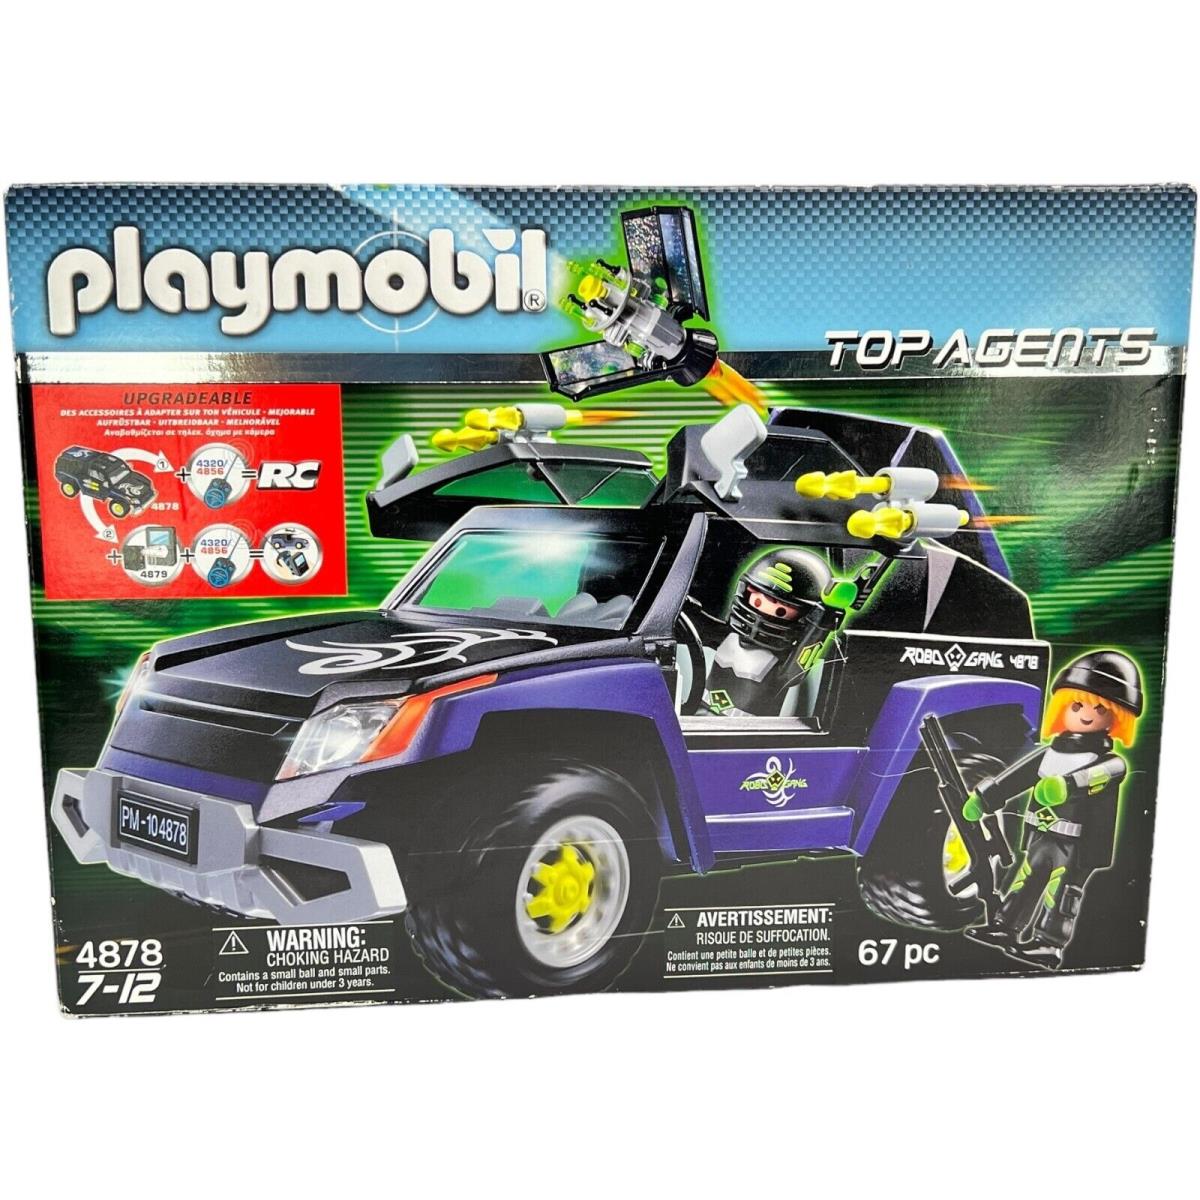 Playmobil 4878 Top Agents Robo Gang Upgradeable Toy 67 Pcs